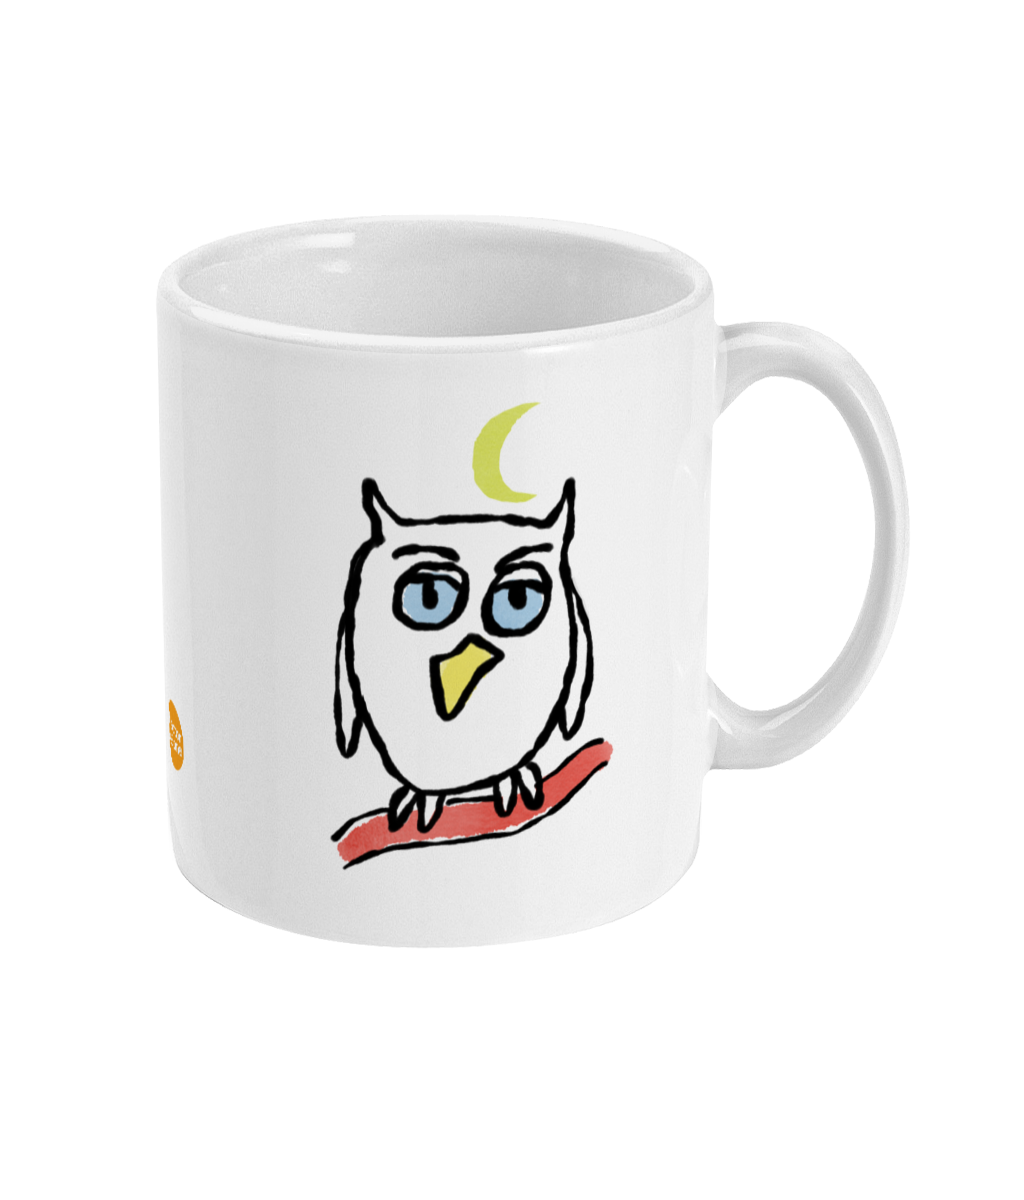 Night Owl Mug - Funny cute owl illustrated coffee mug by Hector and Bone Right View